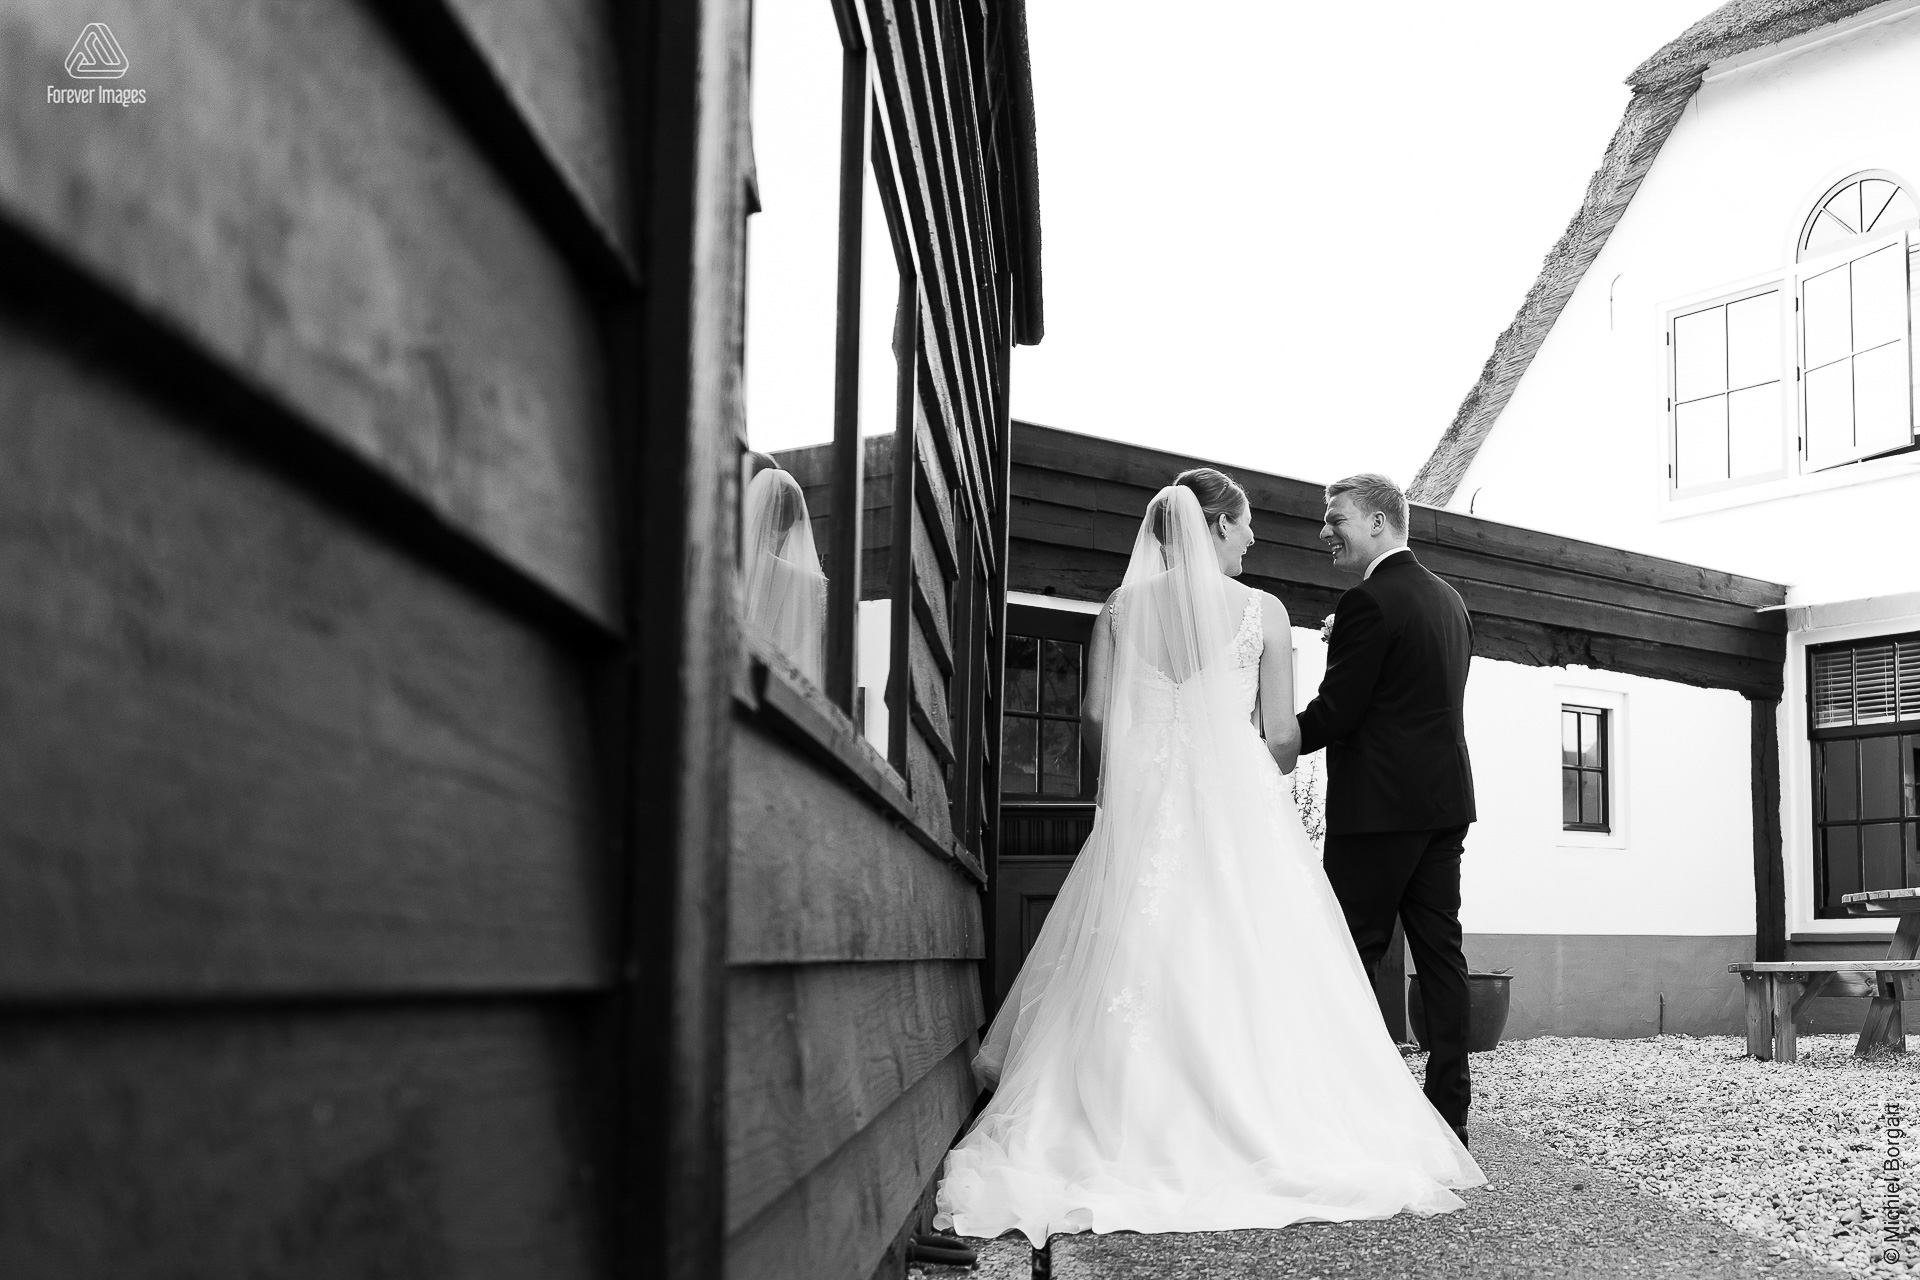 Black and white bridal photo together towards a bright future | Aaron Emmy Kloosterhoeve | Wedding Photographer Michiel Borgart - Forever Images.